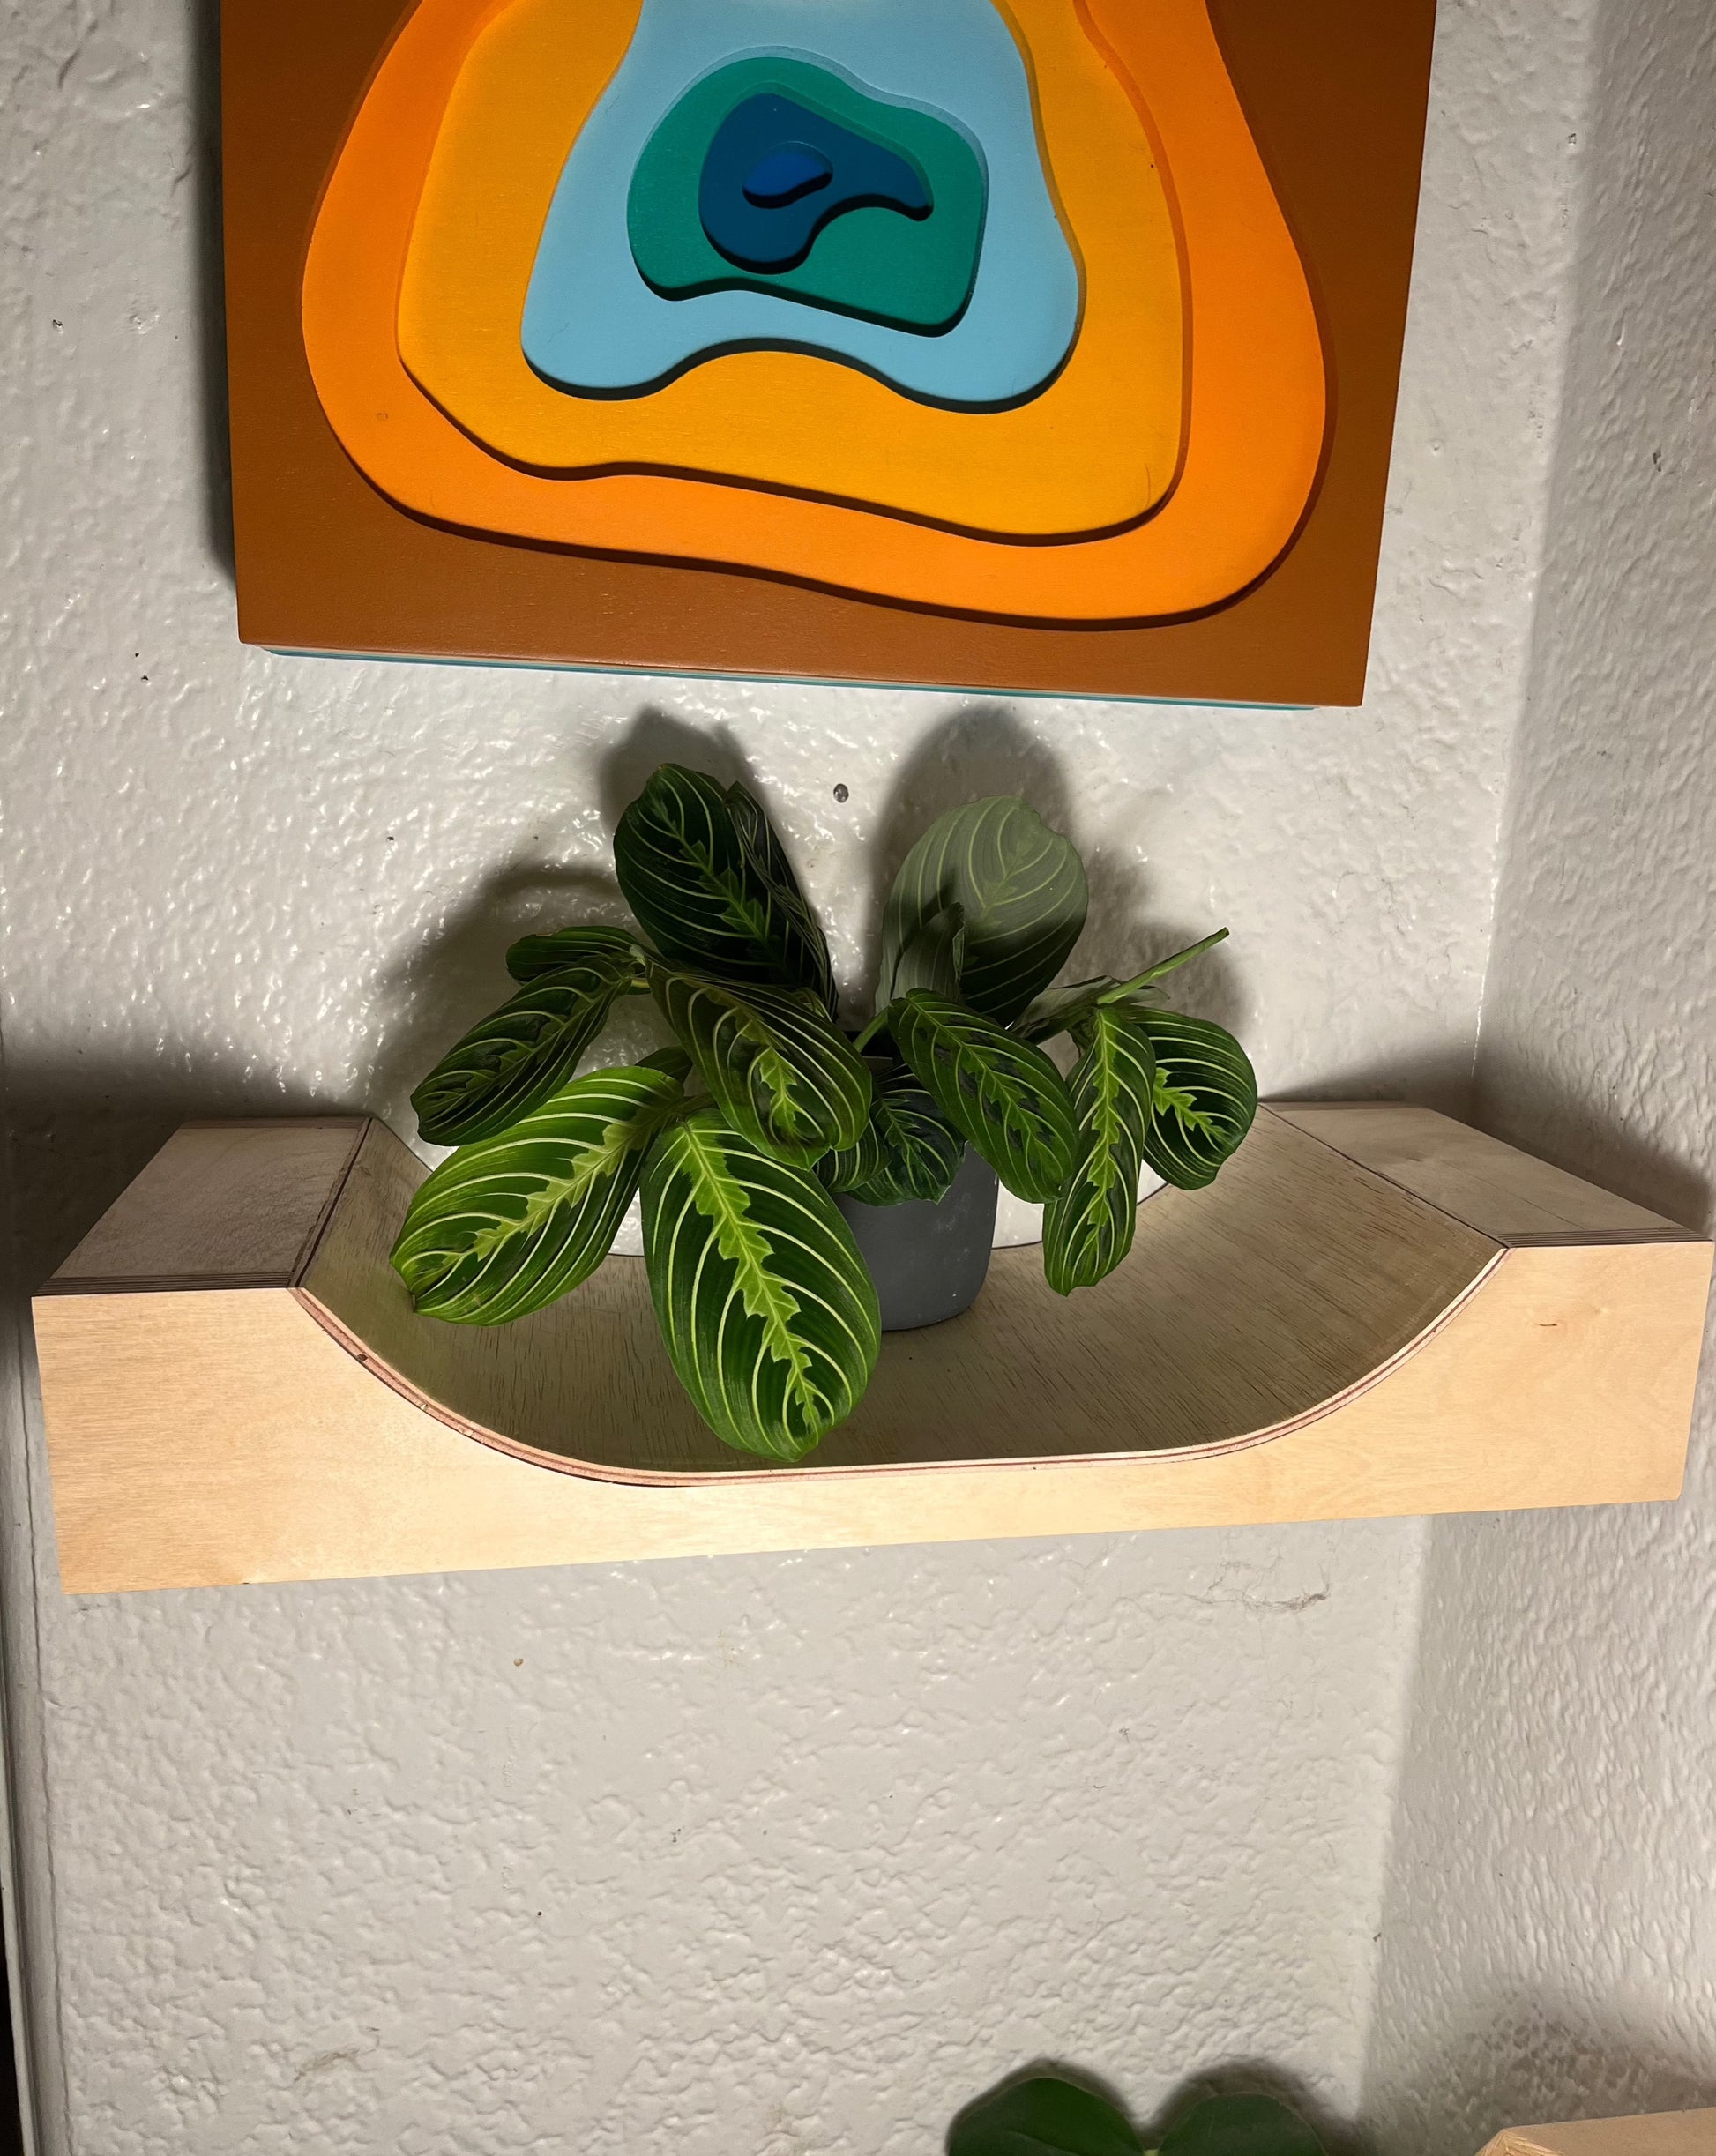 micro mini ramp with plant on top and geothermal art piece in background